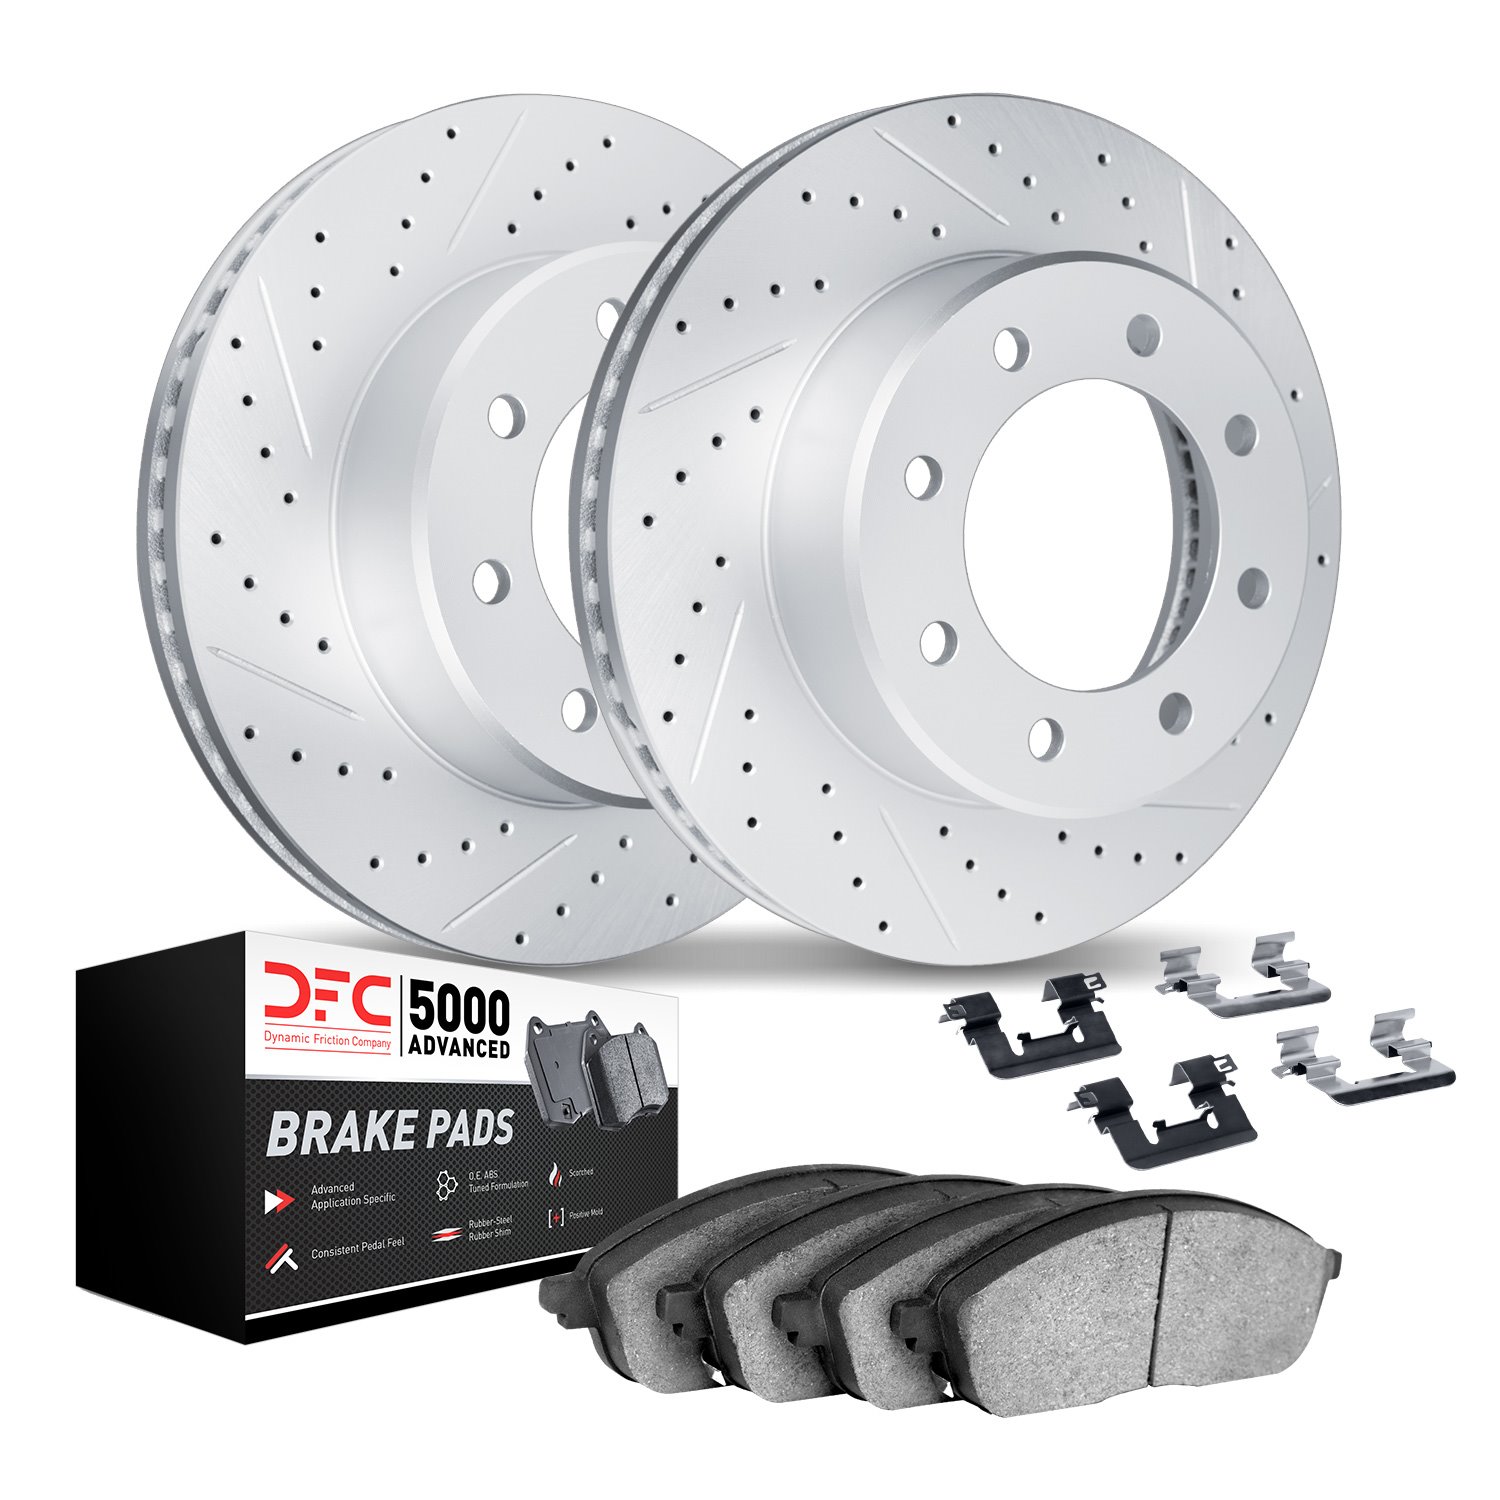 2512-54133 Geoperformance Drilled/Slotted Rotors w/5000 Advanced Brake Pads Kit & Hardware, Fits Select Ford/Lincoln/Mercury/Maz